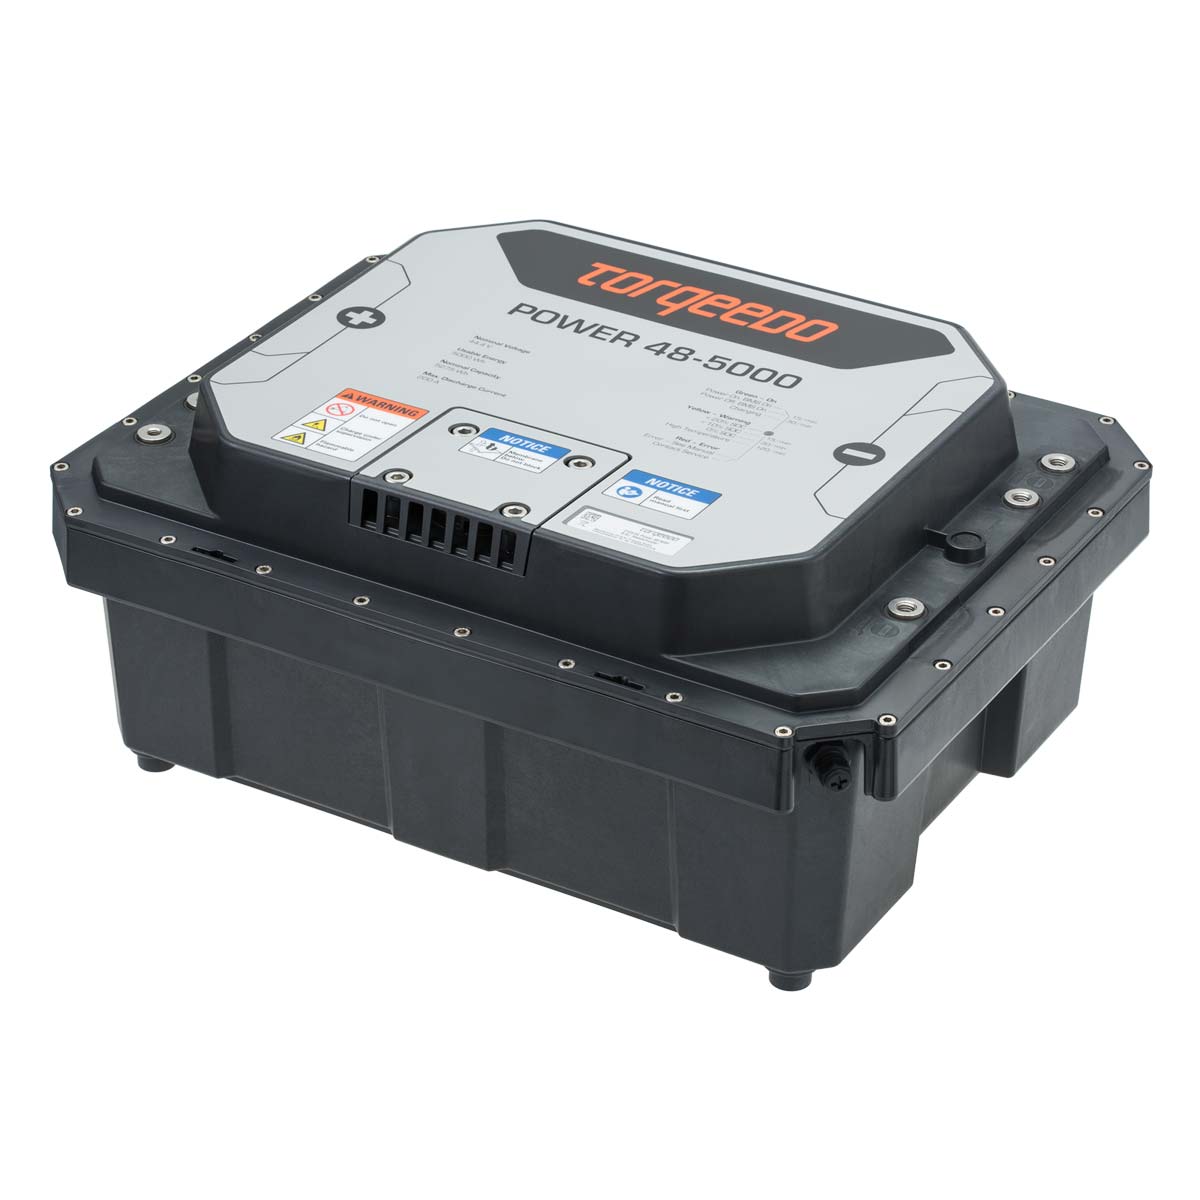 Torqeedo Power 48-5000 Lithium Battery For commercial operators and green boaters